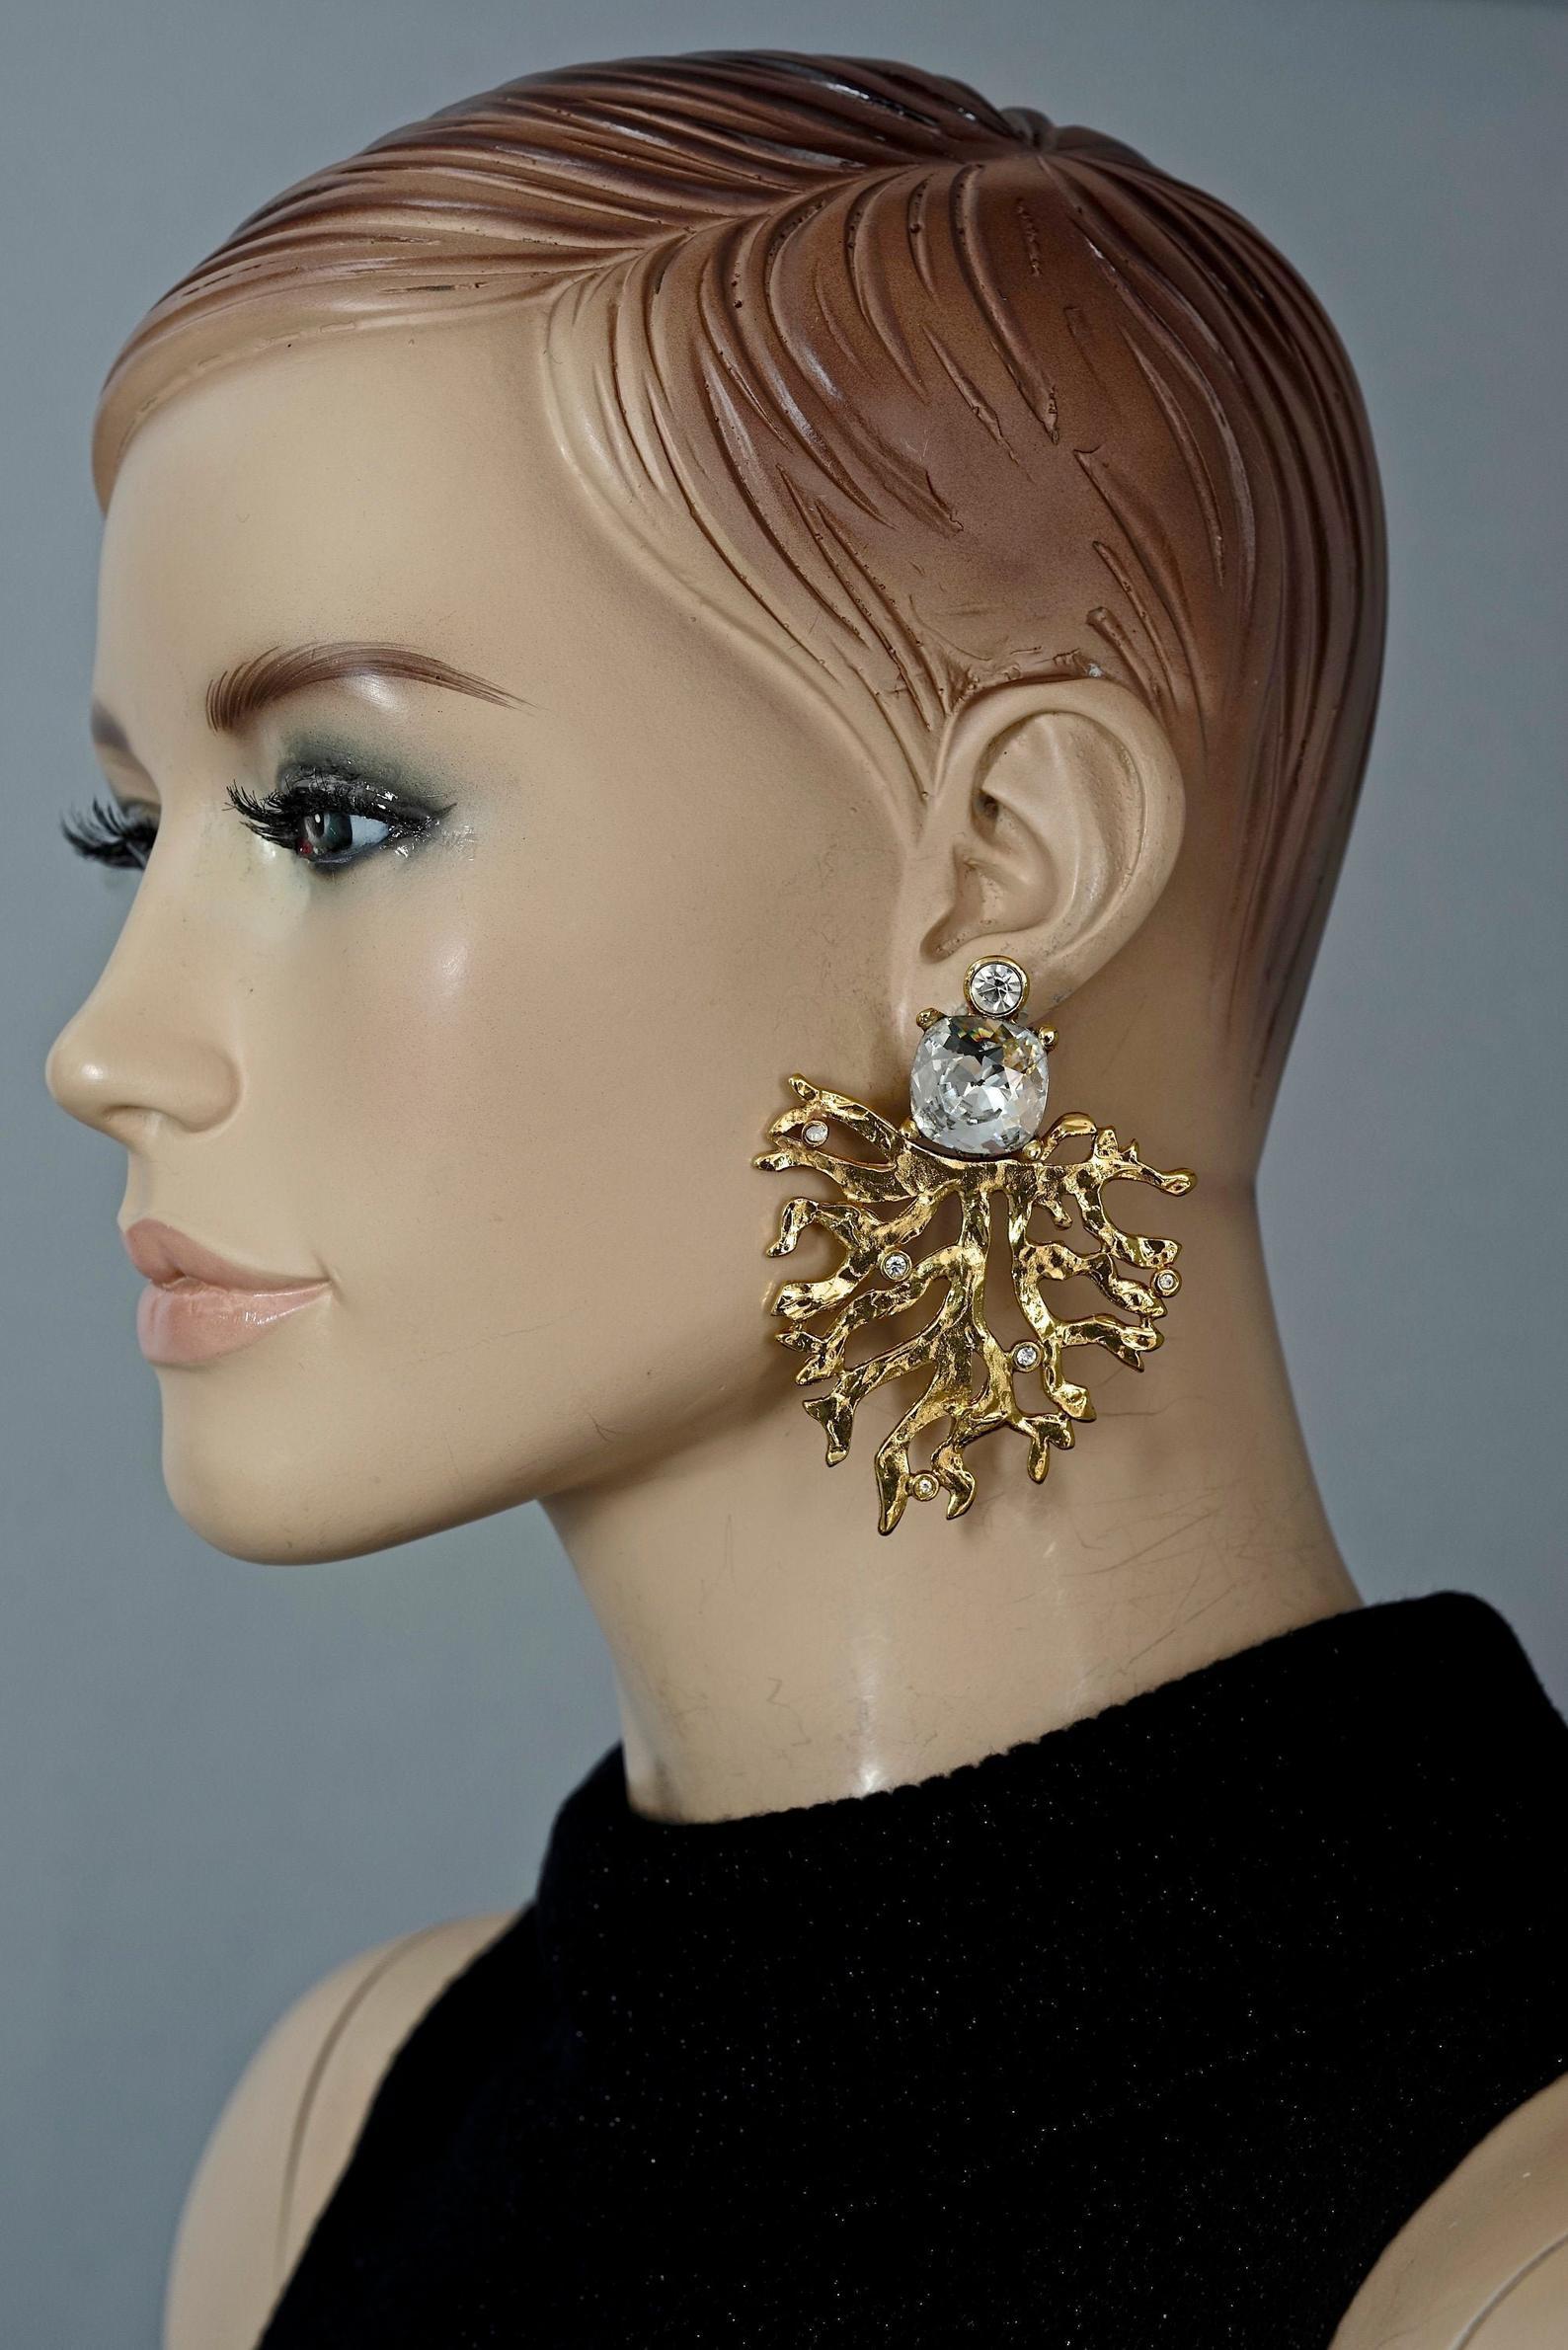 Vintage Massive YVES SAINT LAURENT Ysl by Robert Goossens Coral Gilt Rhinestone Earrings

Measurements:
Height: 2.95 inches (7.5 cm)
Width: 2.28 inches (5.8 cm)
Weight per Earring: 29 grams

Features:
- 100% Authentic YVES SAINT LAURENT by Robert